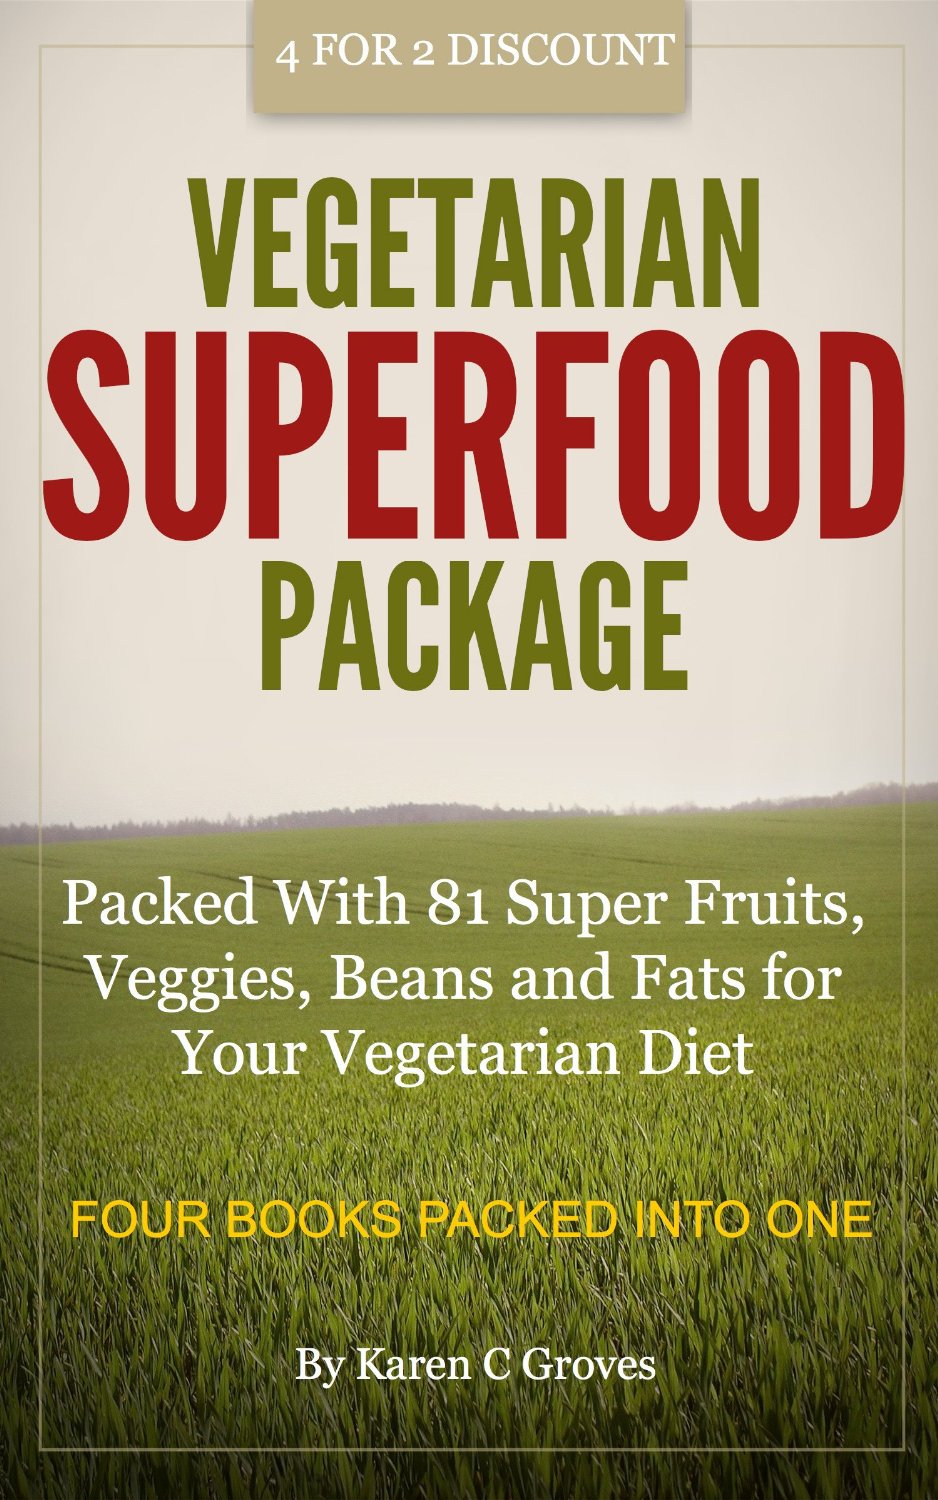 Vegetarian Superfoods Package by Andy Editor